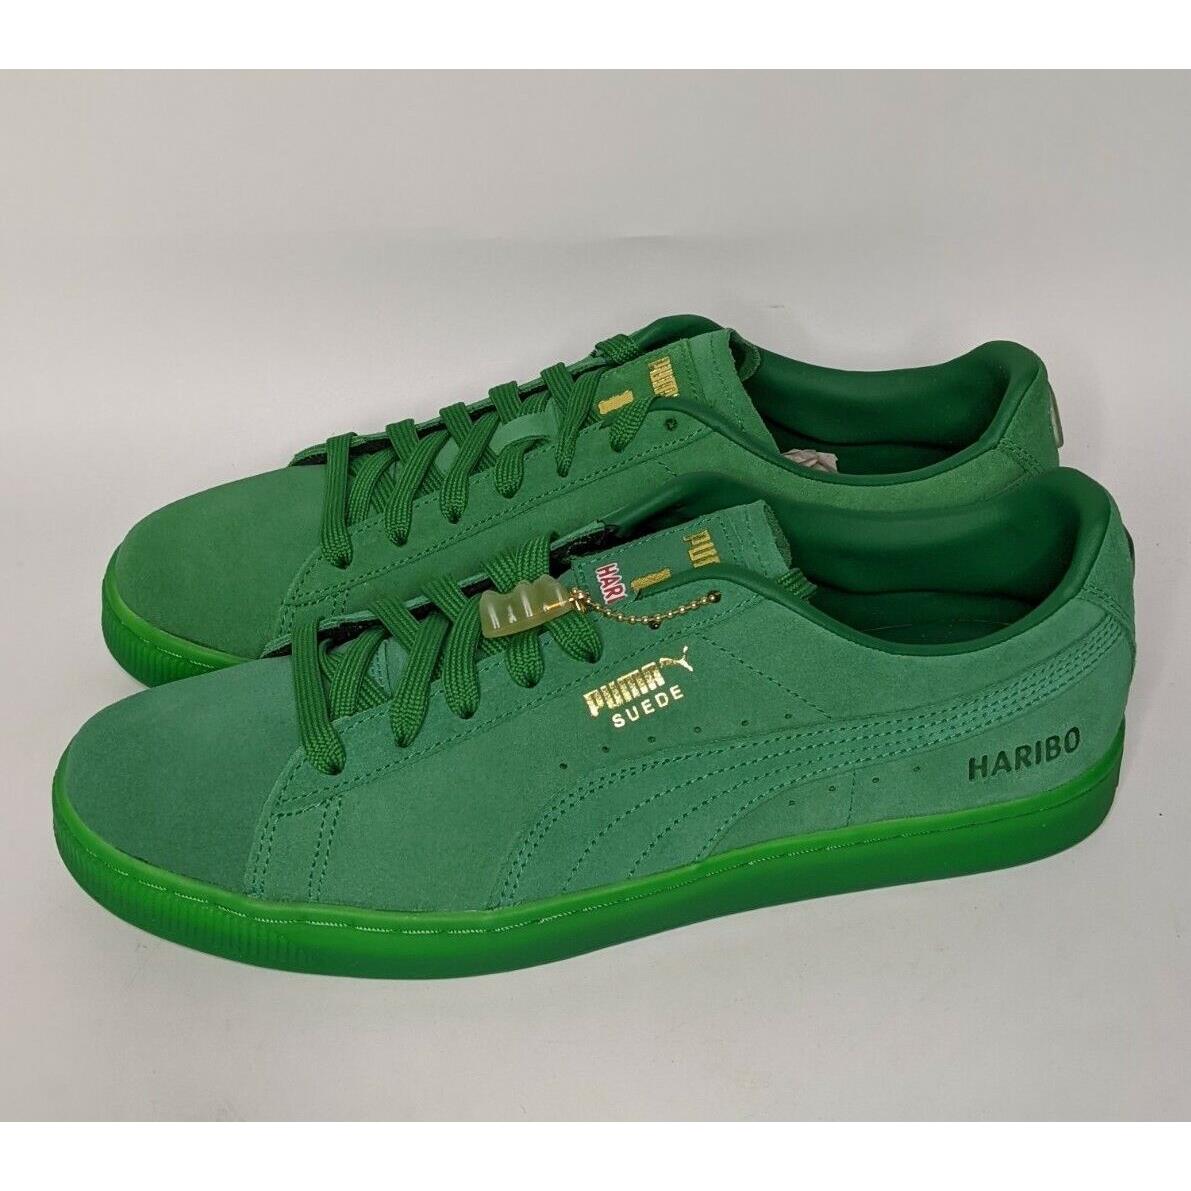 Puma X Haribo Suede Classic 382565-01 Amazon Green Mens Lifestyle Shoes 9.5